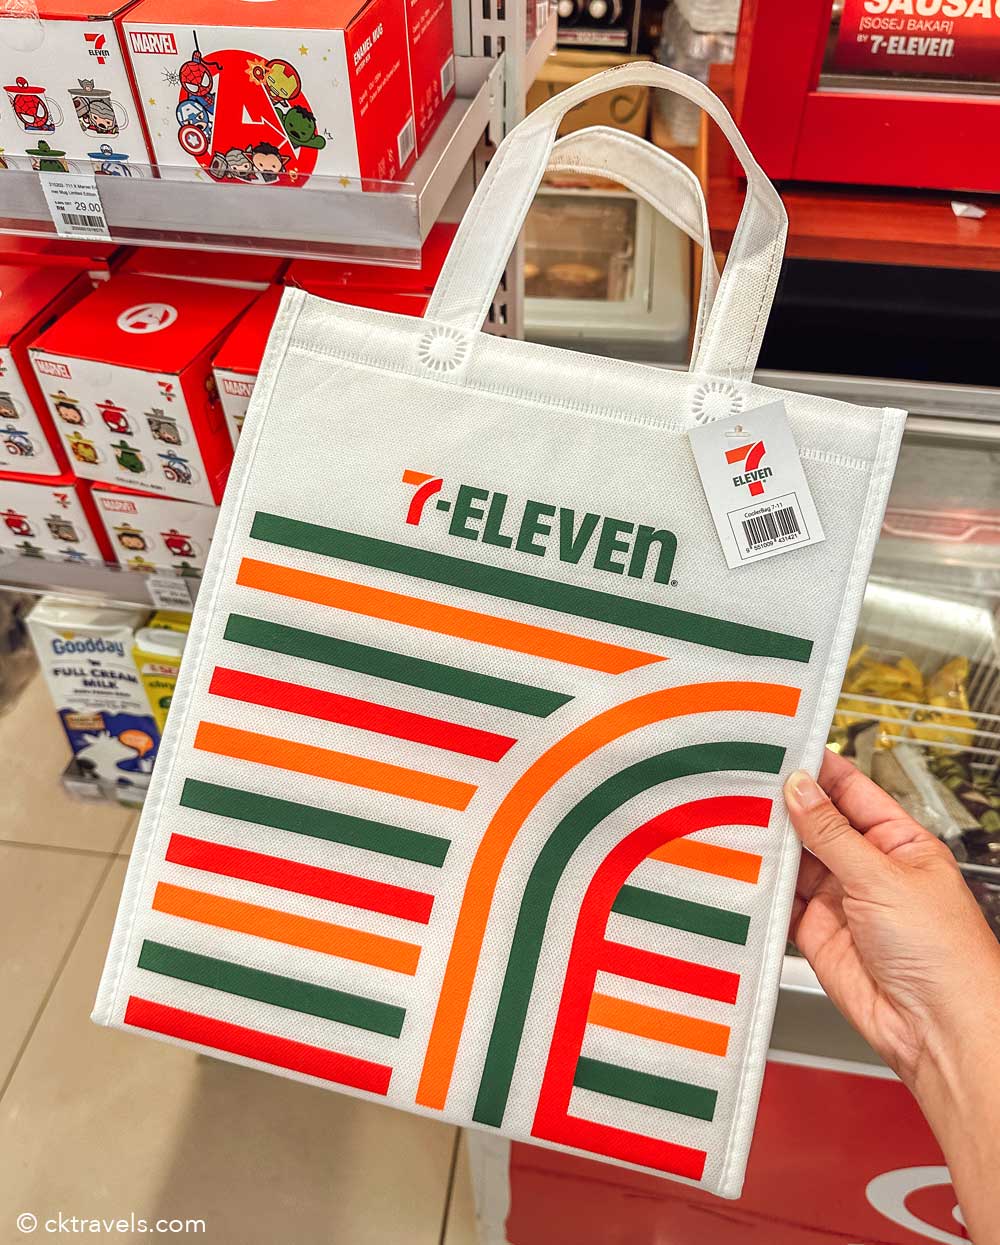 Malaysia 7-Eleven Stores - Branded Chiller Bags